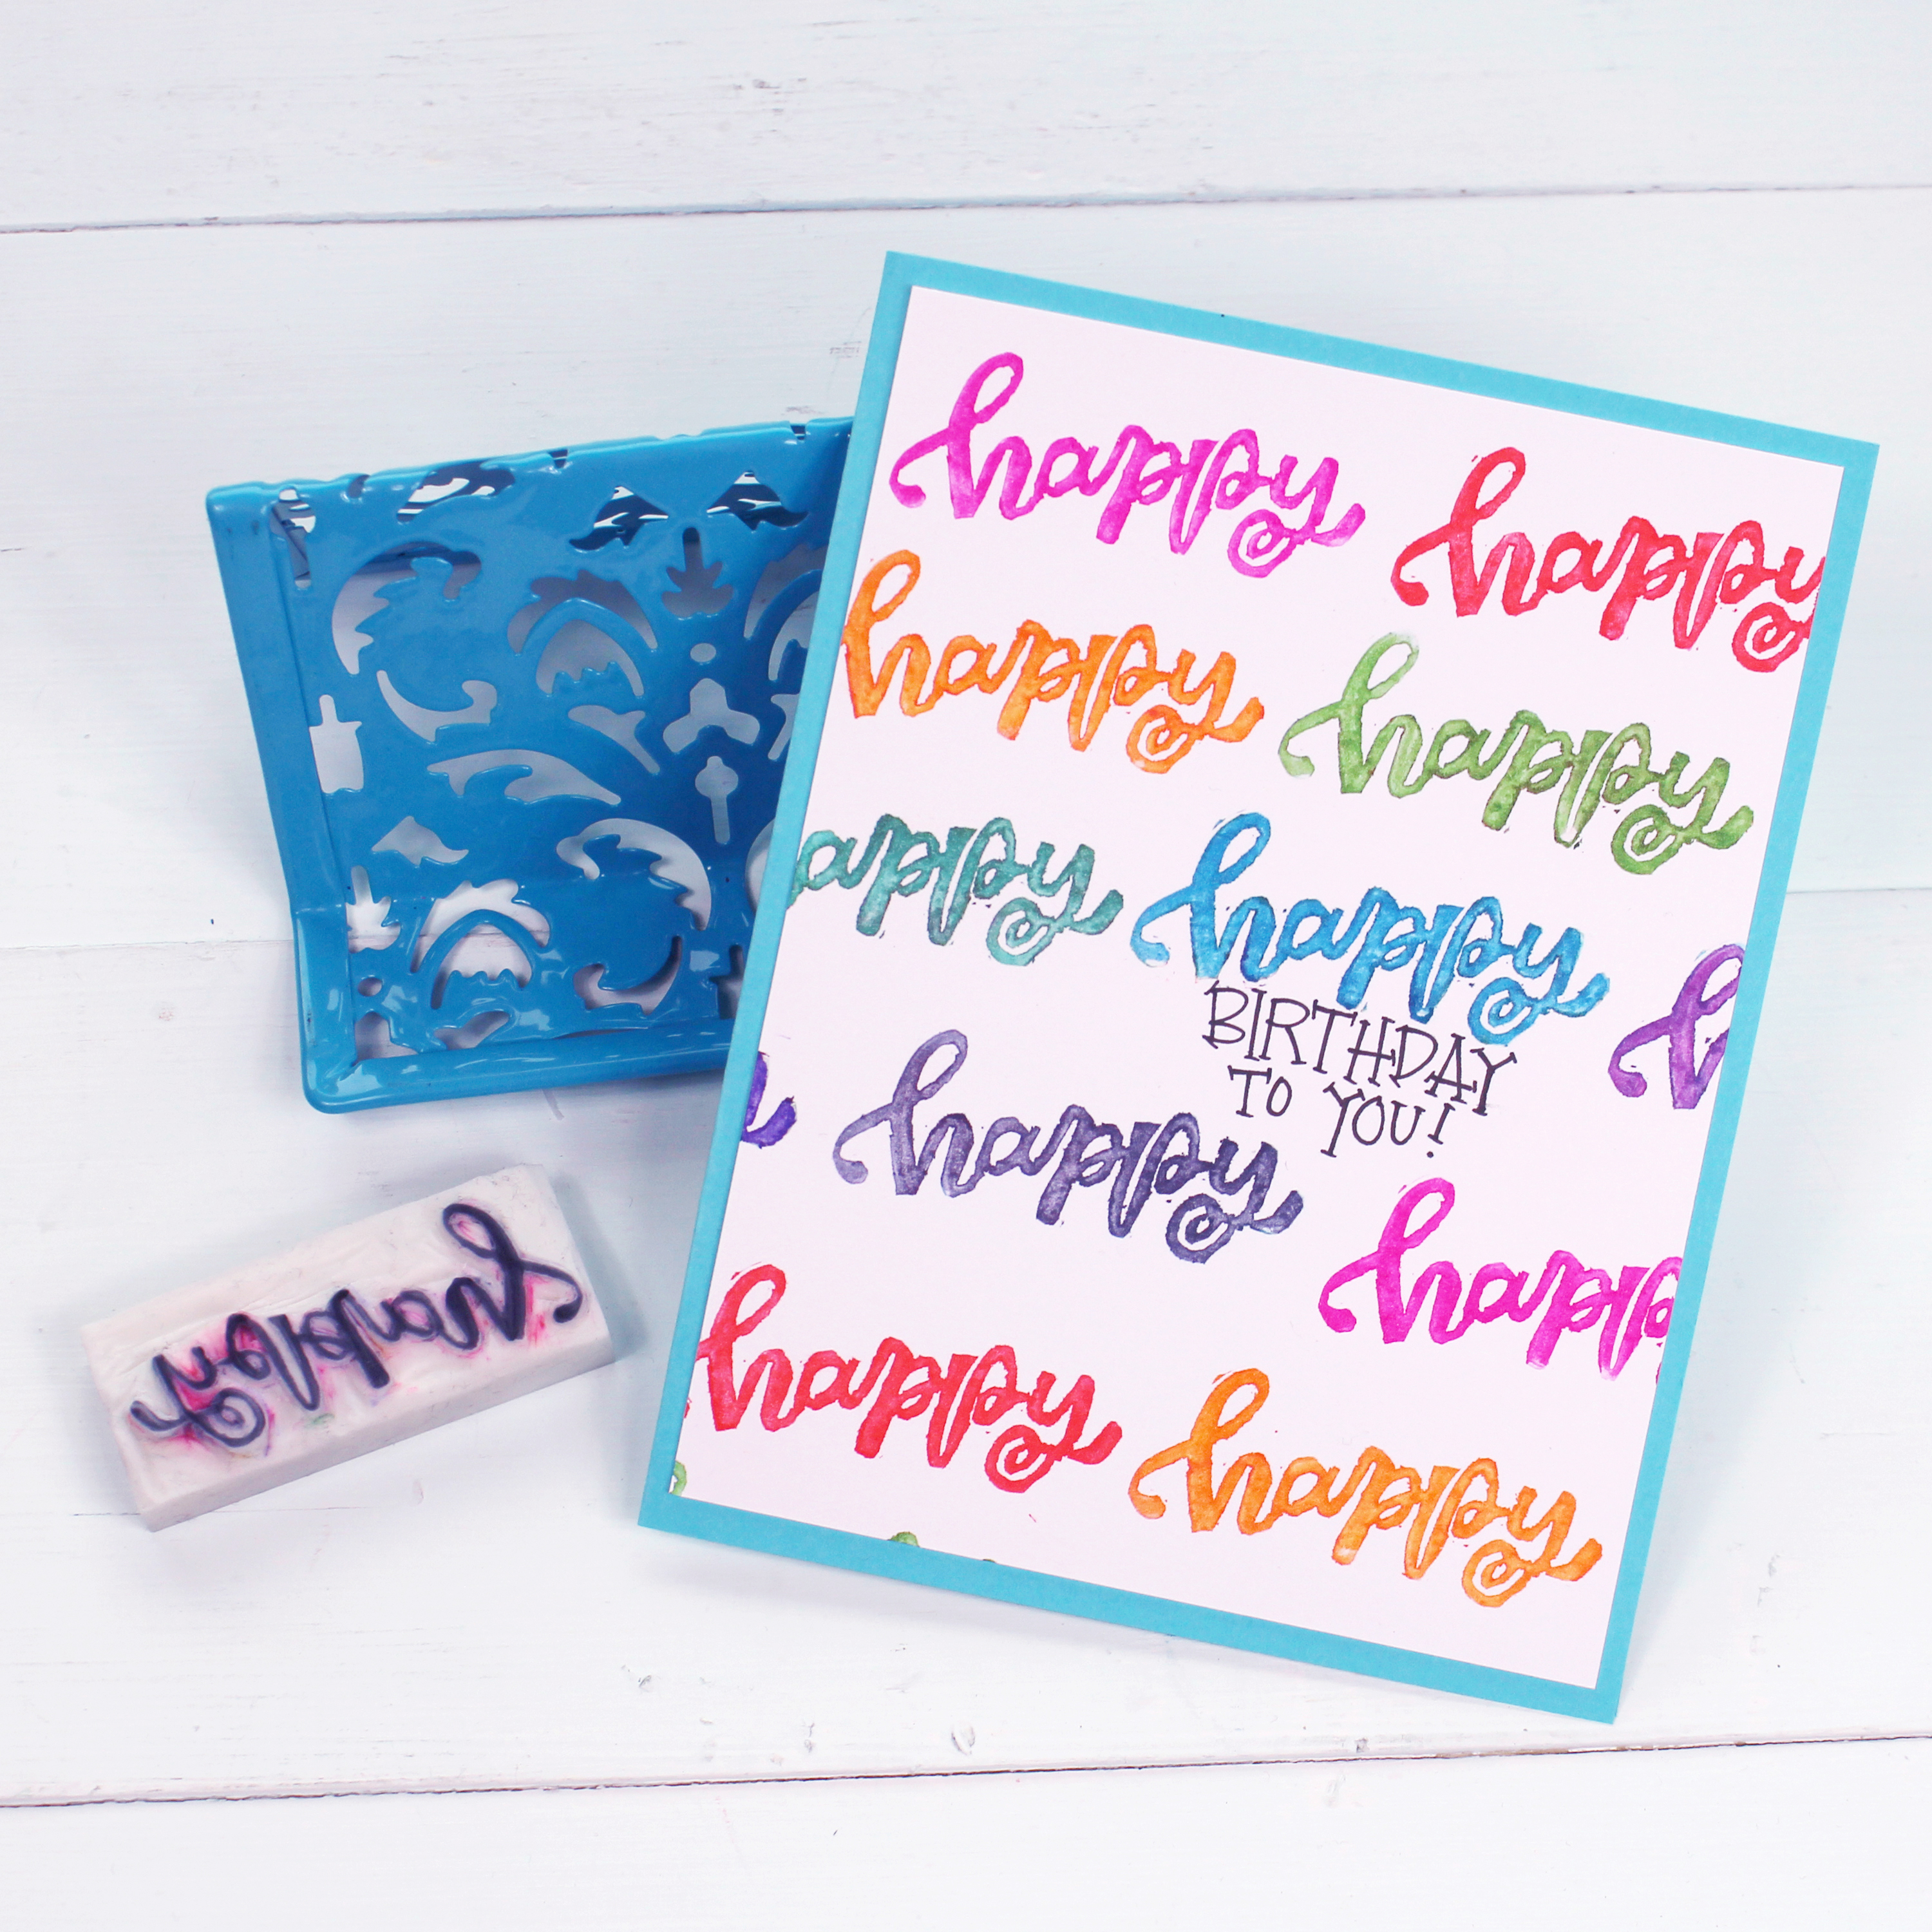 Make a cute Happy carved stamp from a Tombow MONO Eraser that is perfect for making cards, stamping papers or decorating happy mail.